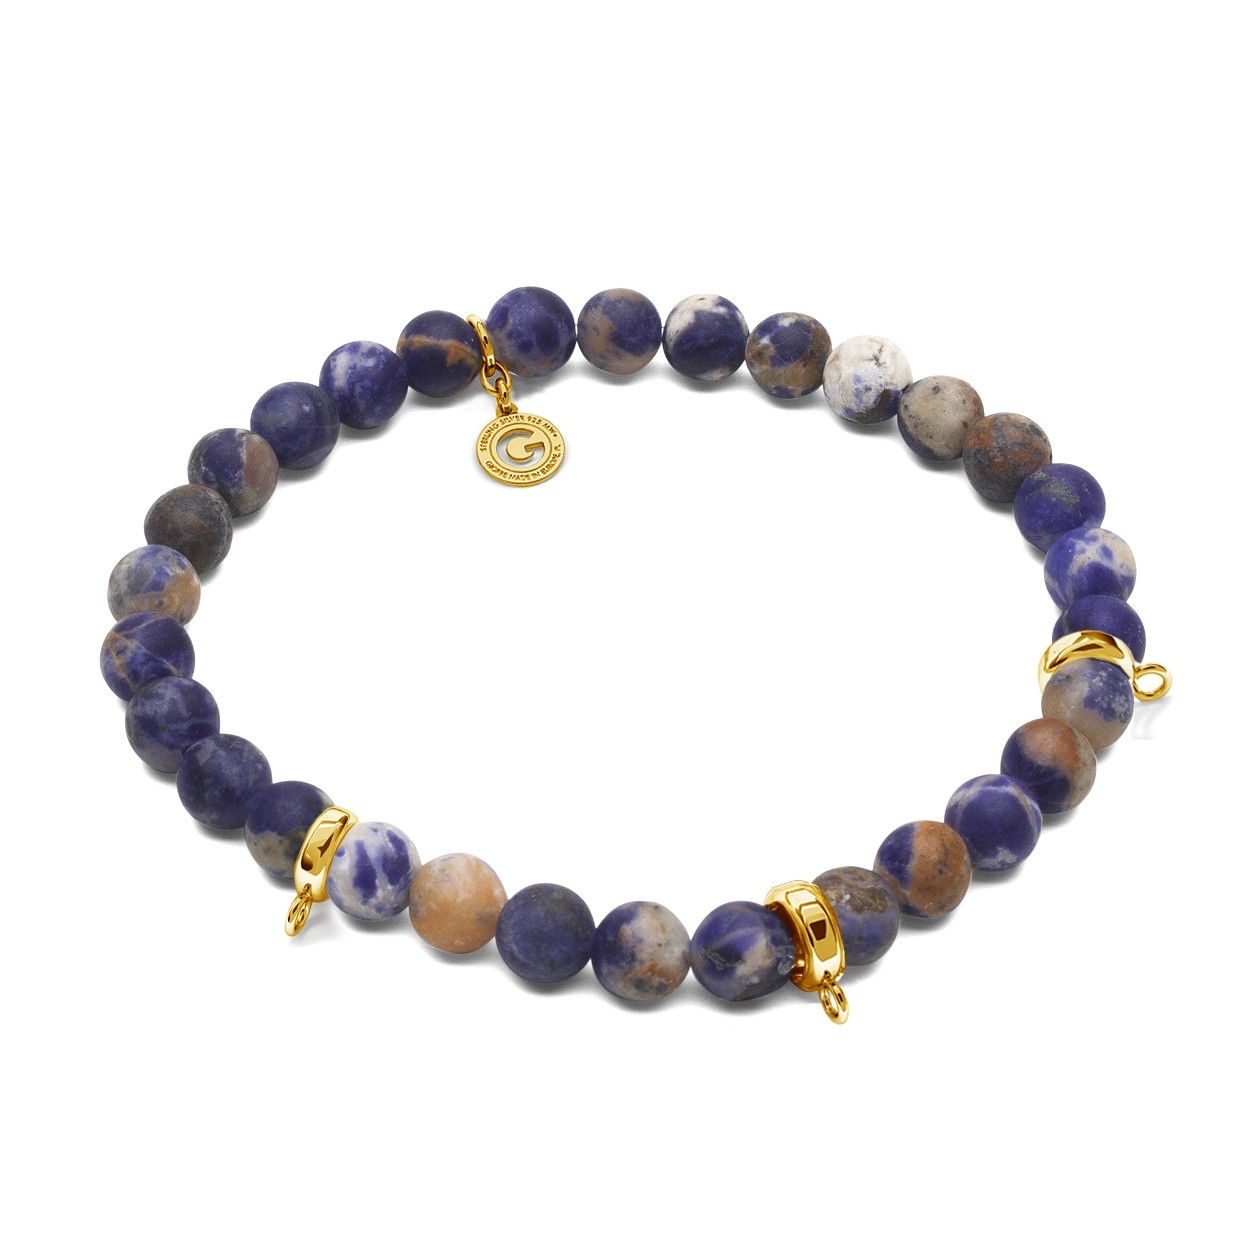 SODALITE, FLEXIBLE BRACELET FOR 3 CHARMS, WITH NATURAL STONES